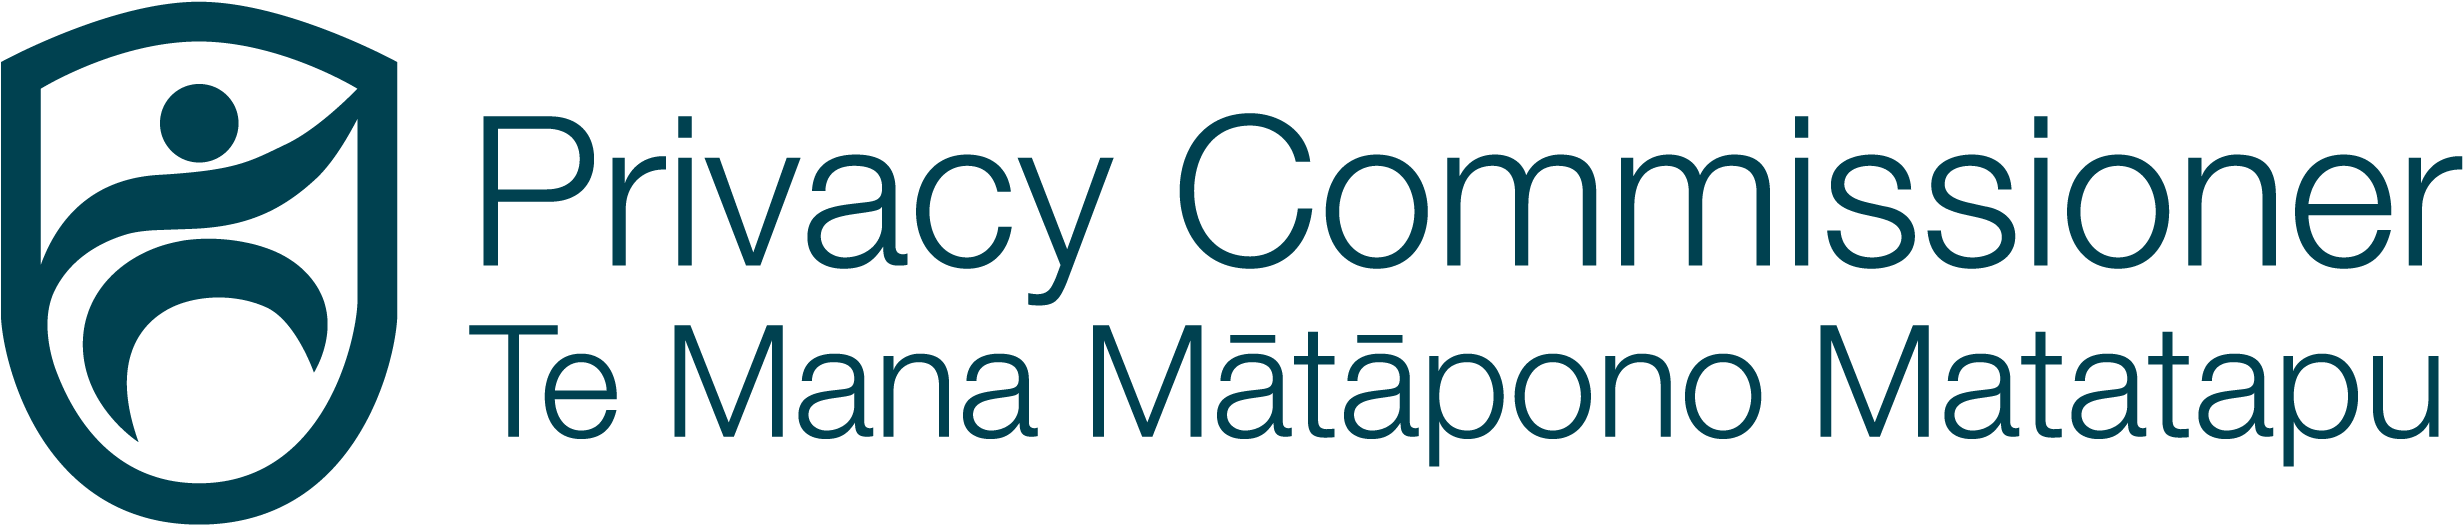 Privacy Commissioner Logo Macrons Large Rgb - Jacksonville Children's Commission (3508x1567), Png Download